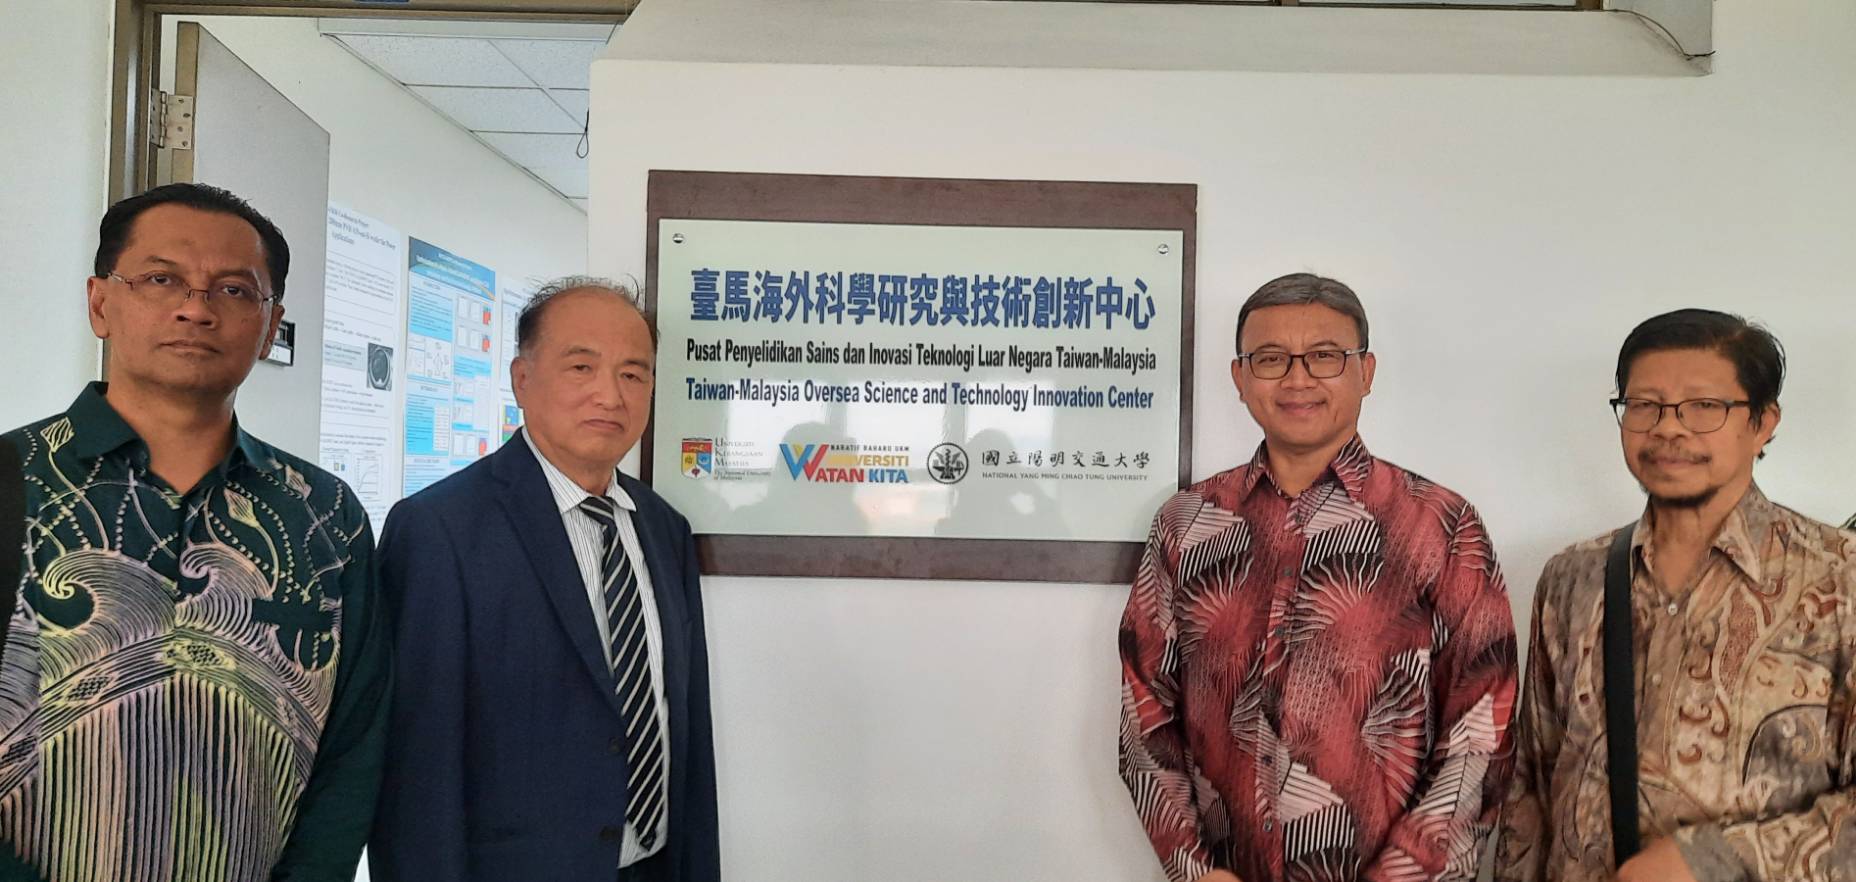 Taiwan-Malaysia Oversea Science and Technology Innovation Center Open Ceremony's picture